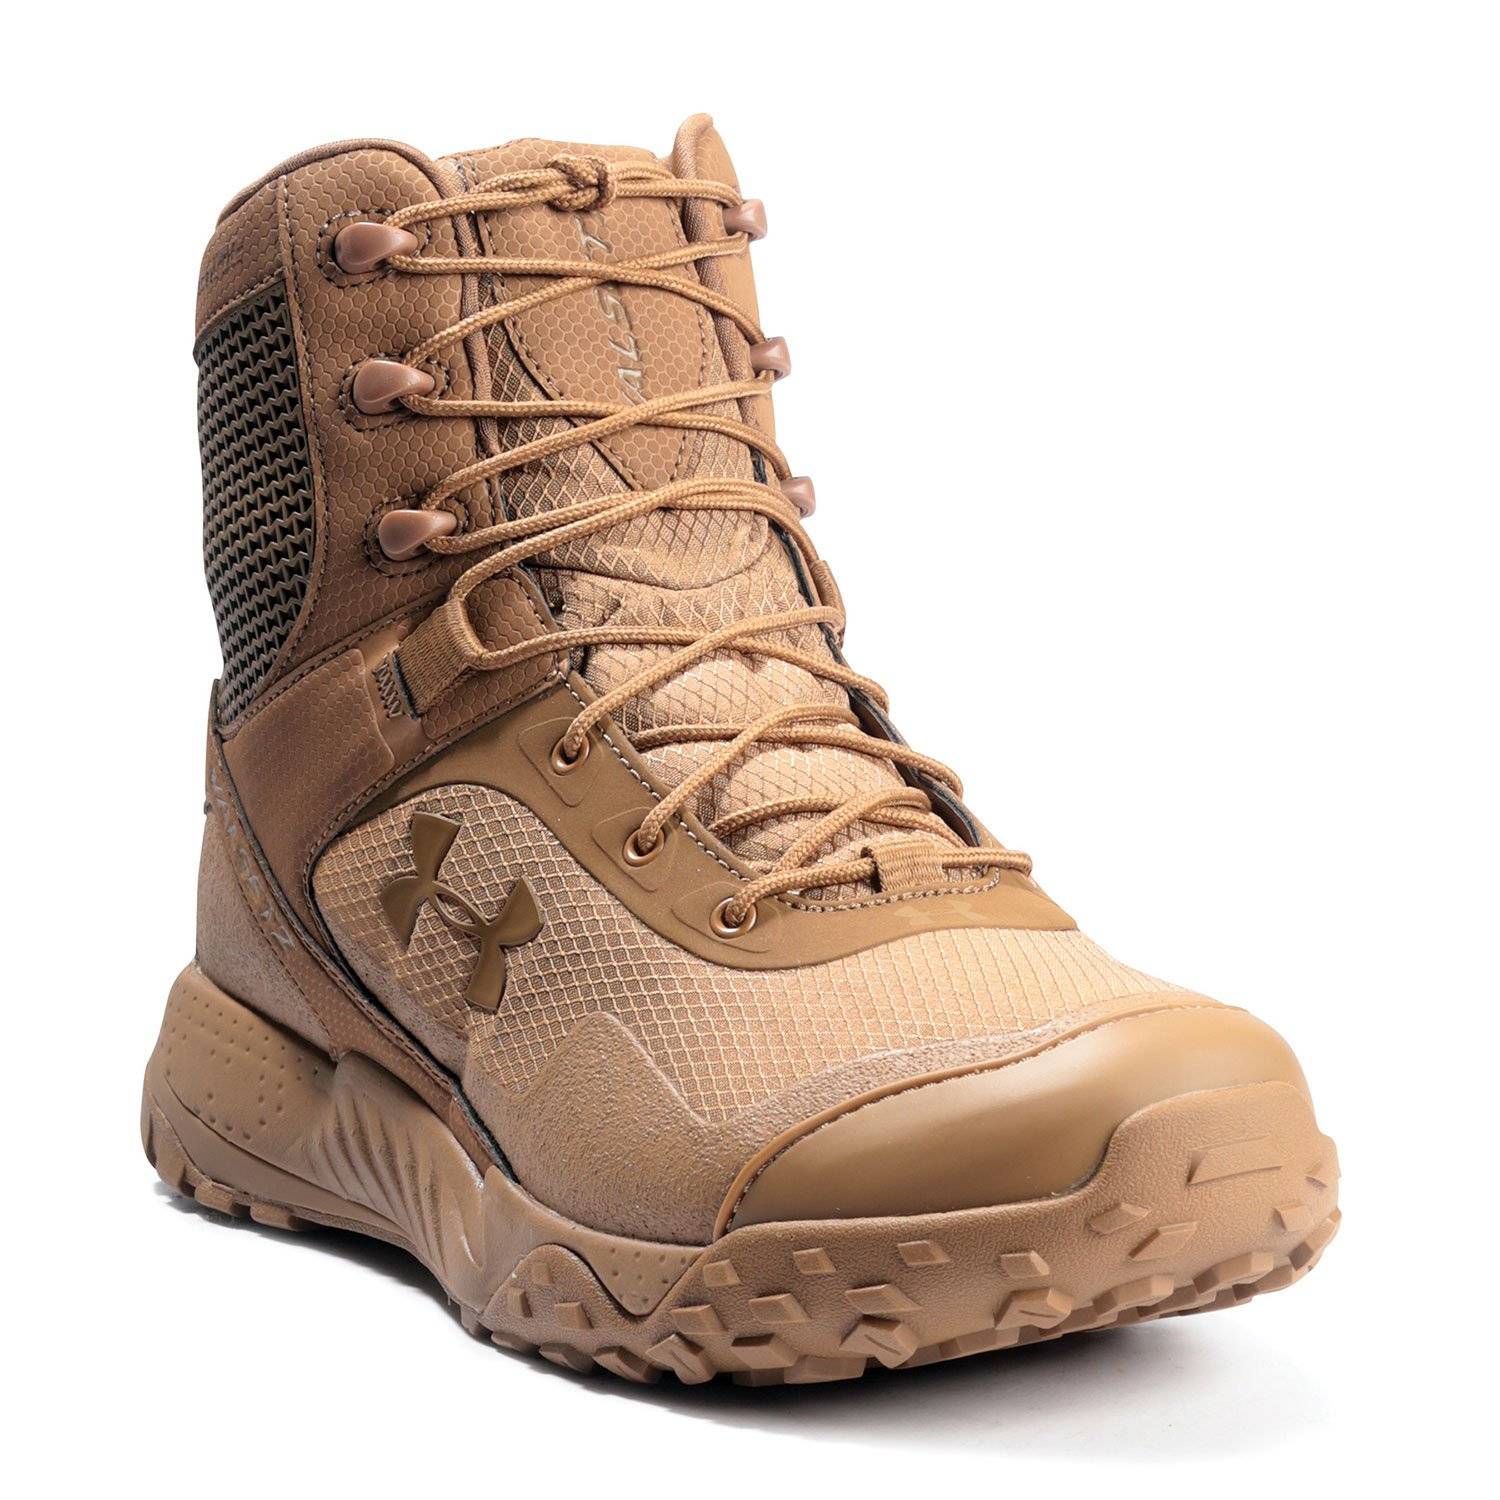 women's valsetz rts military and tactical boot